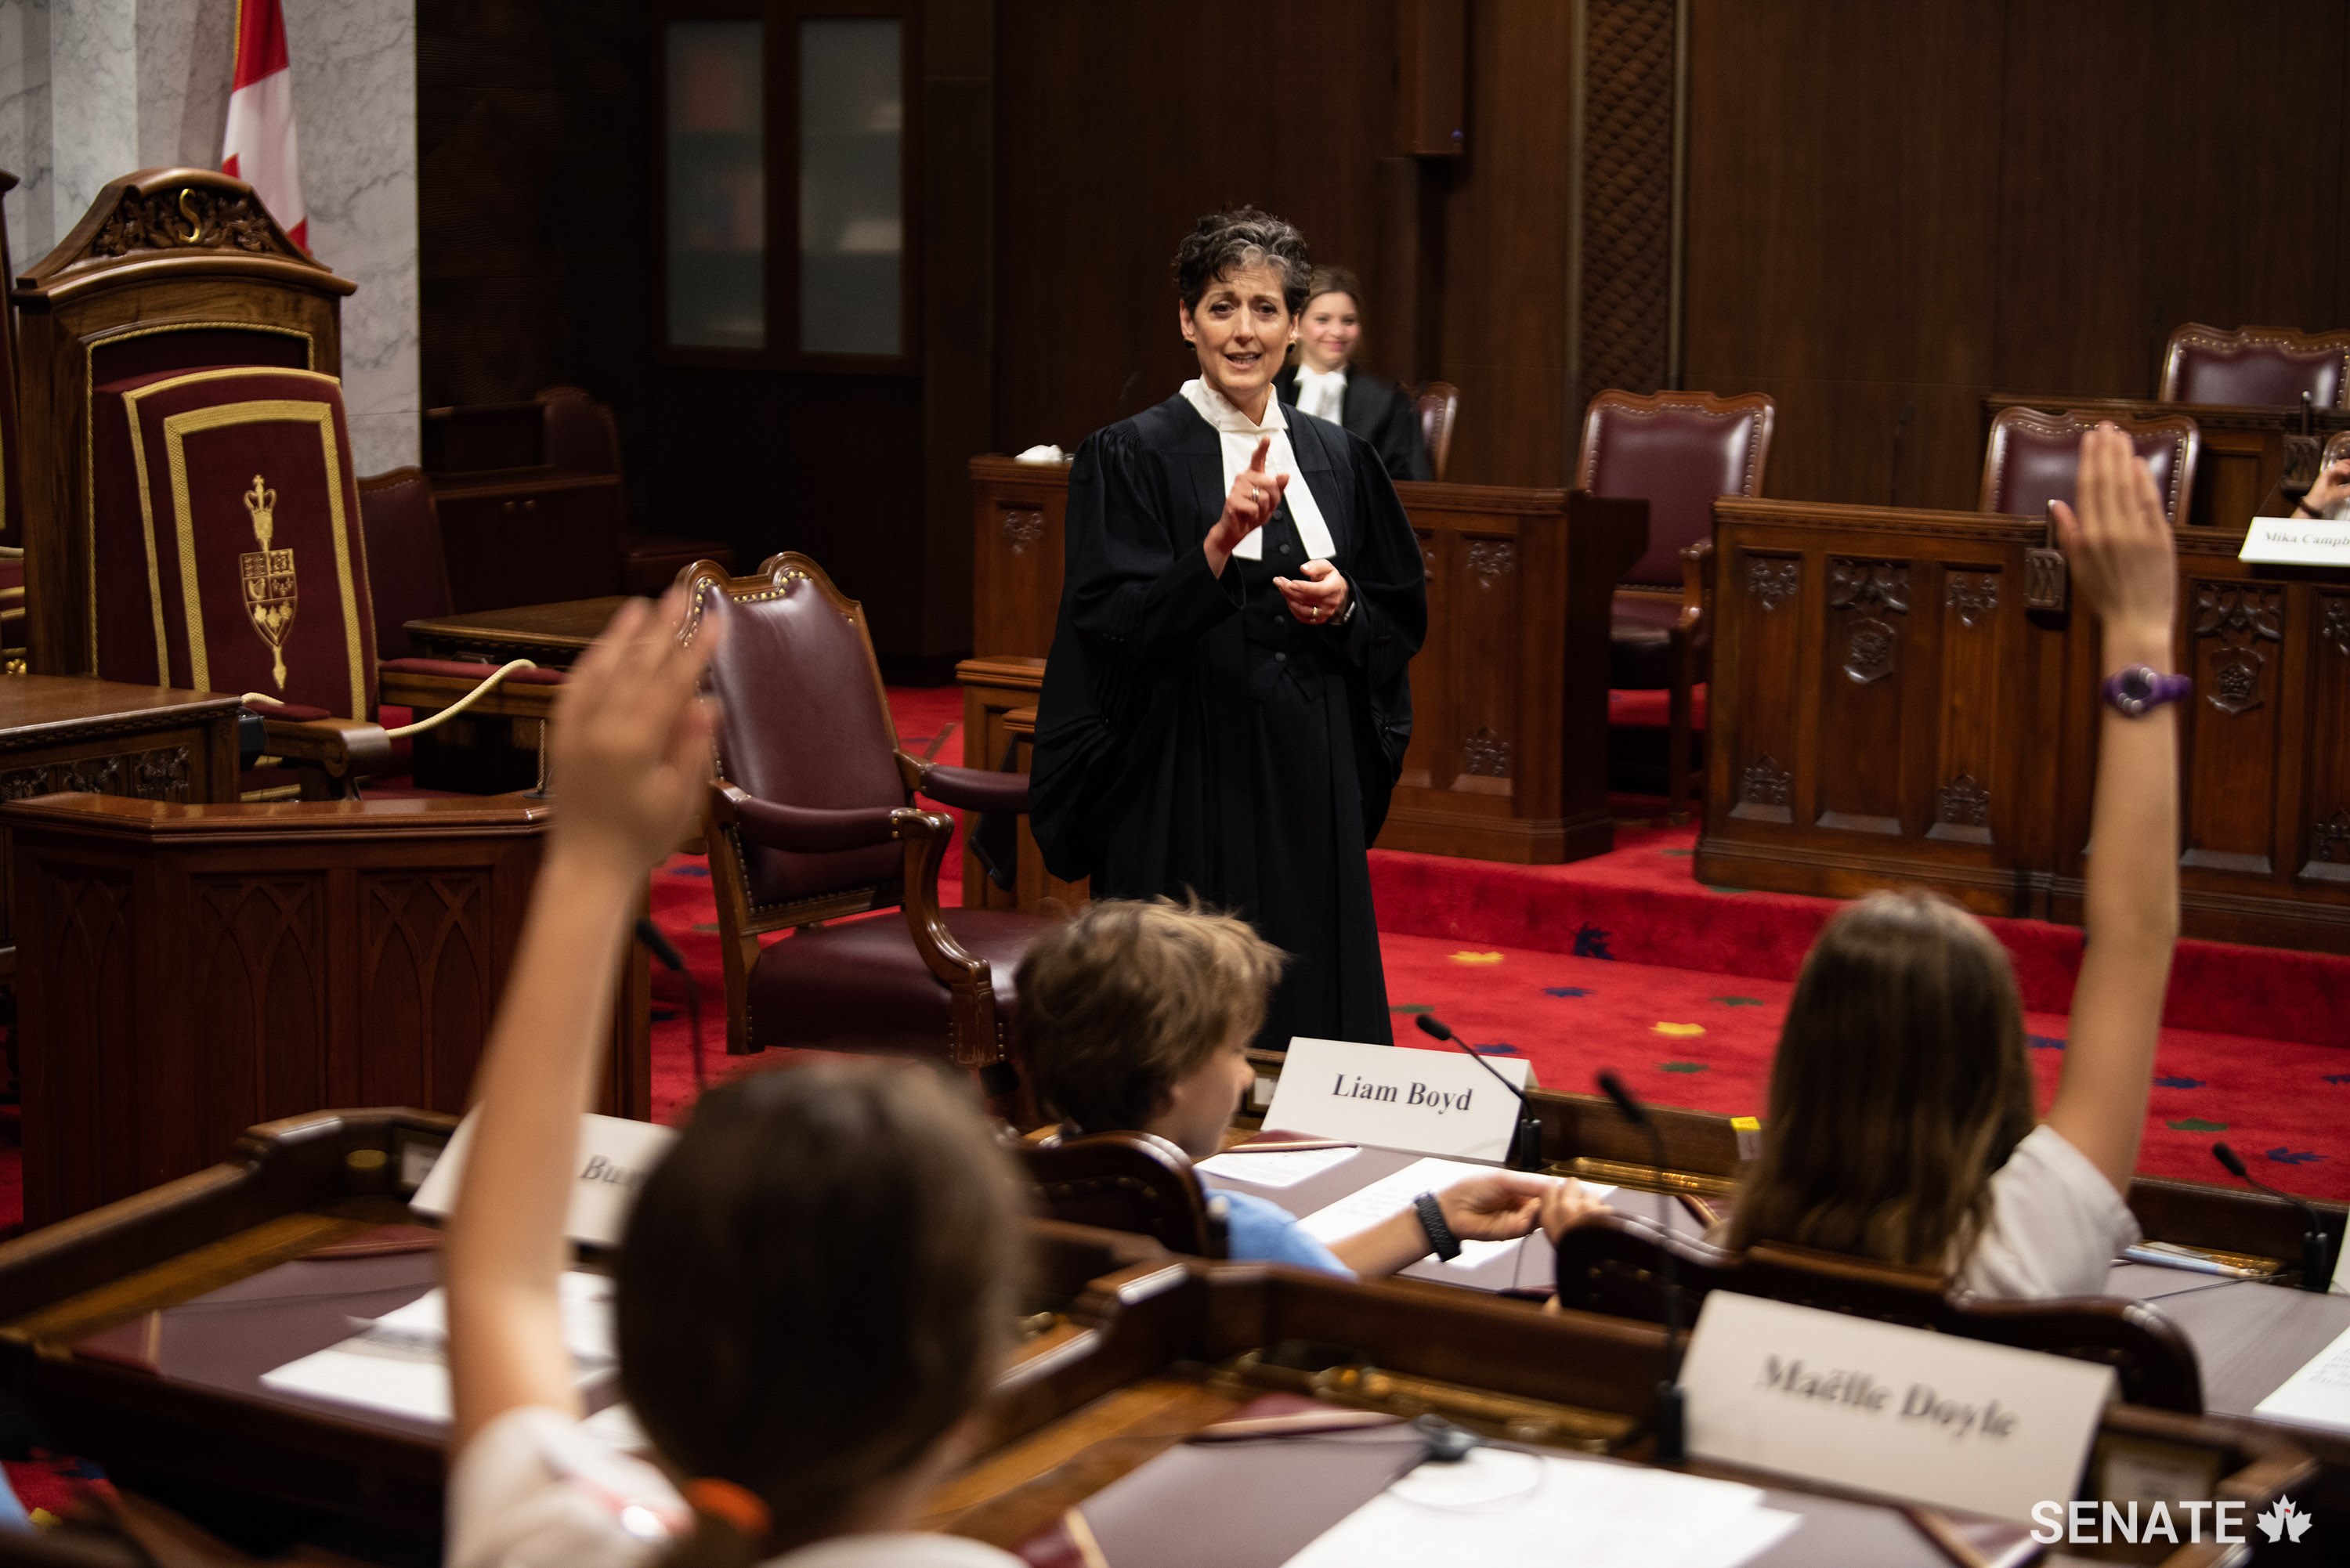 Senator Forest-Niesing chairs a mock Senate session with Grade 6 students from the Ottawa region on May 17, 2019.